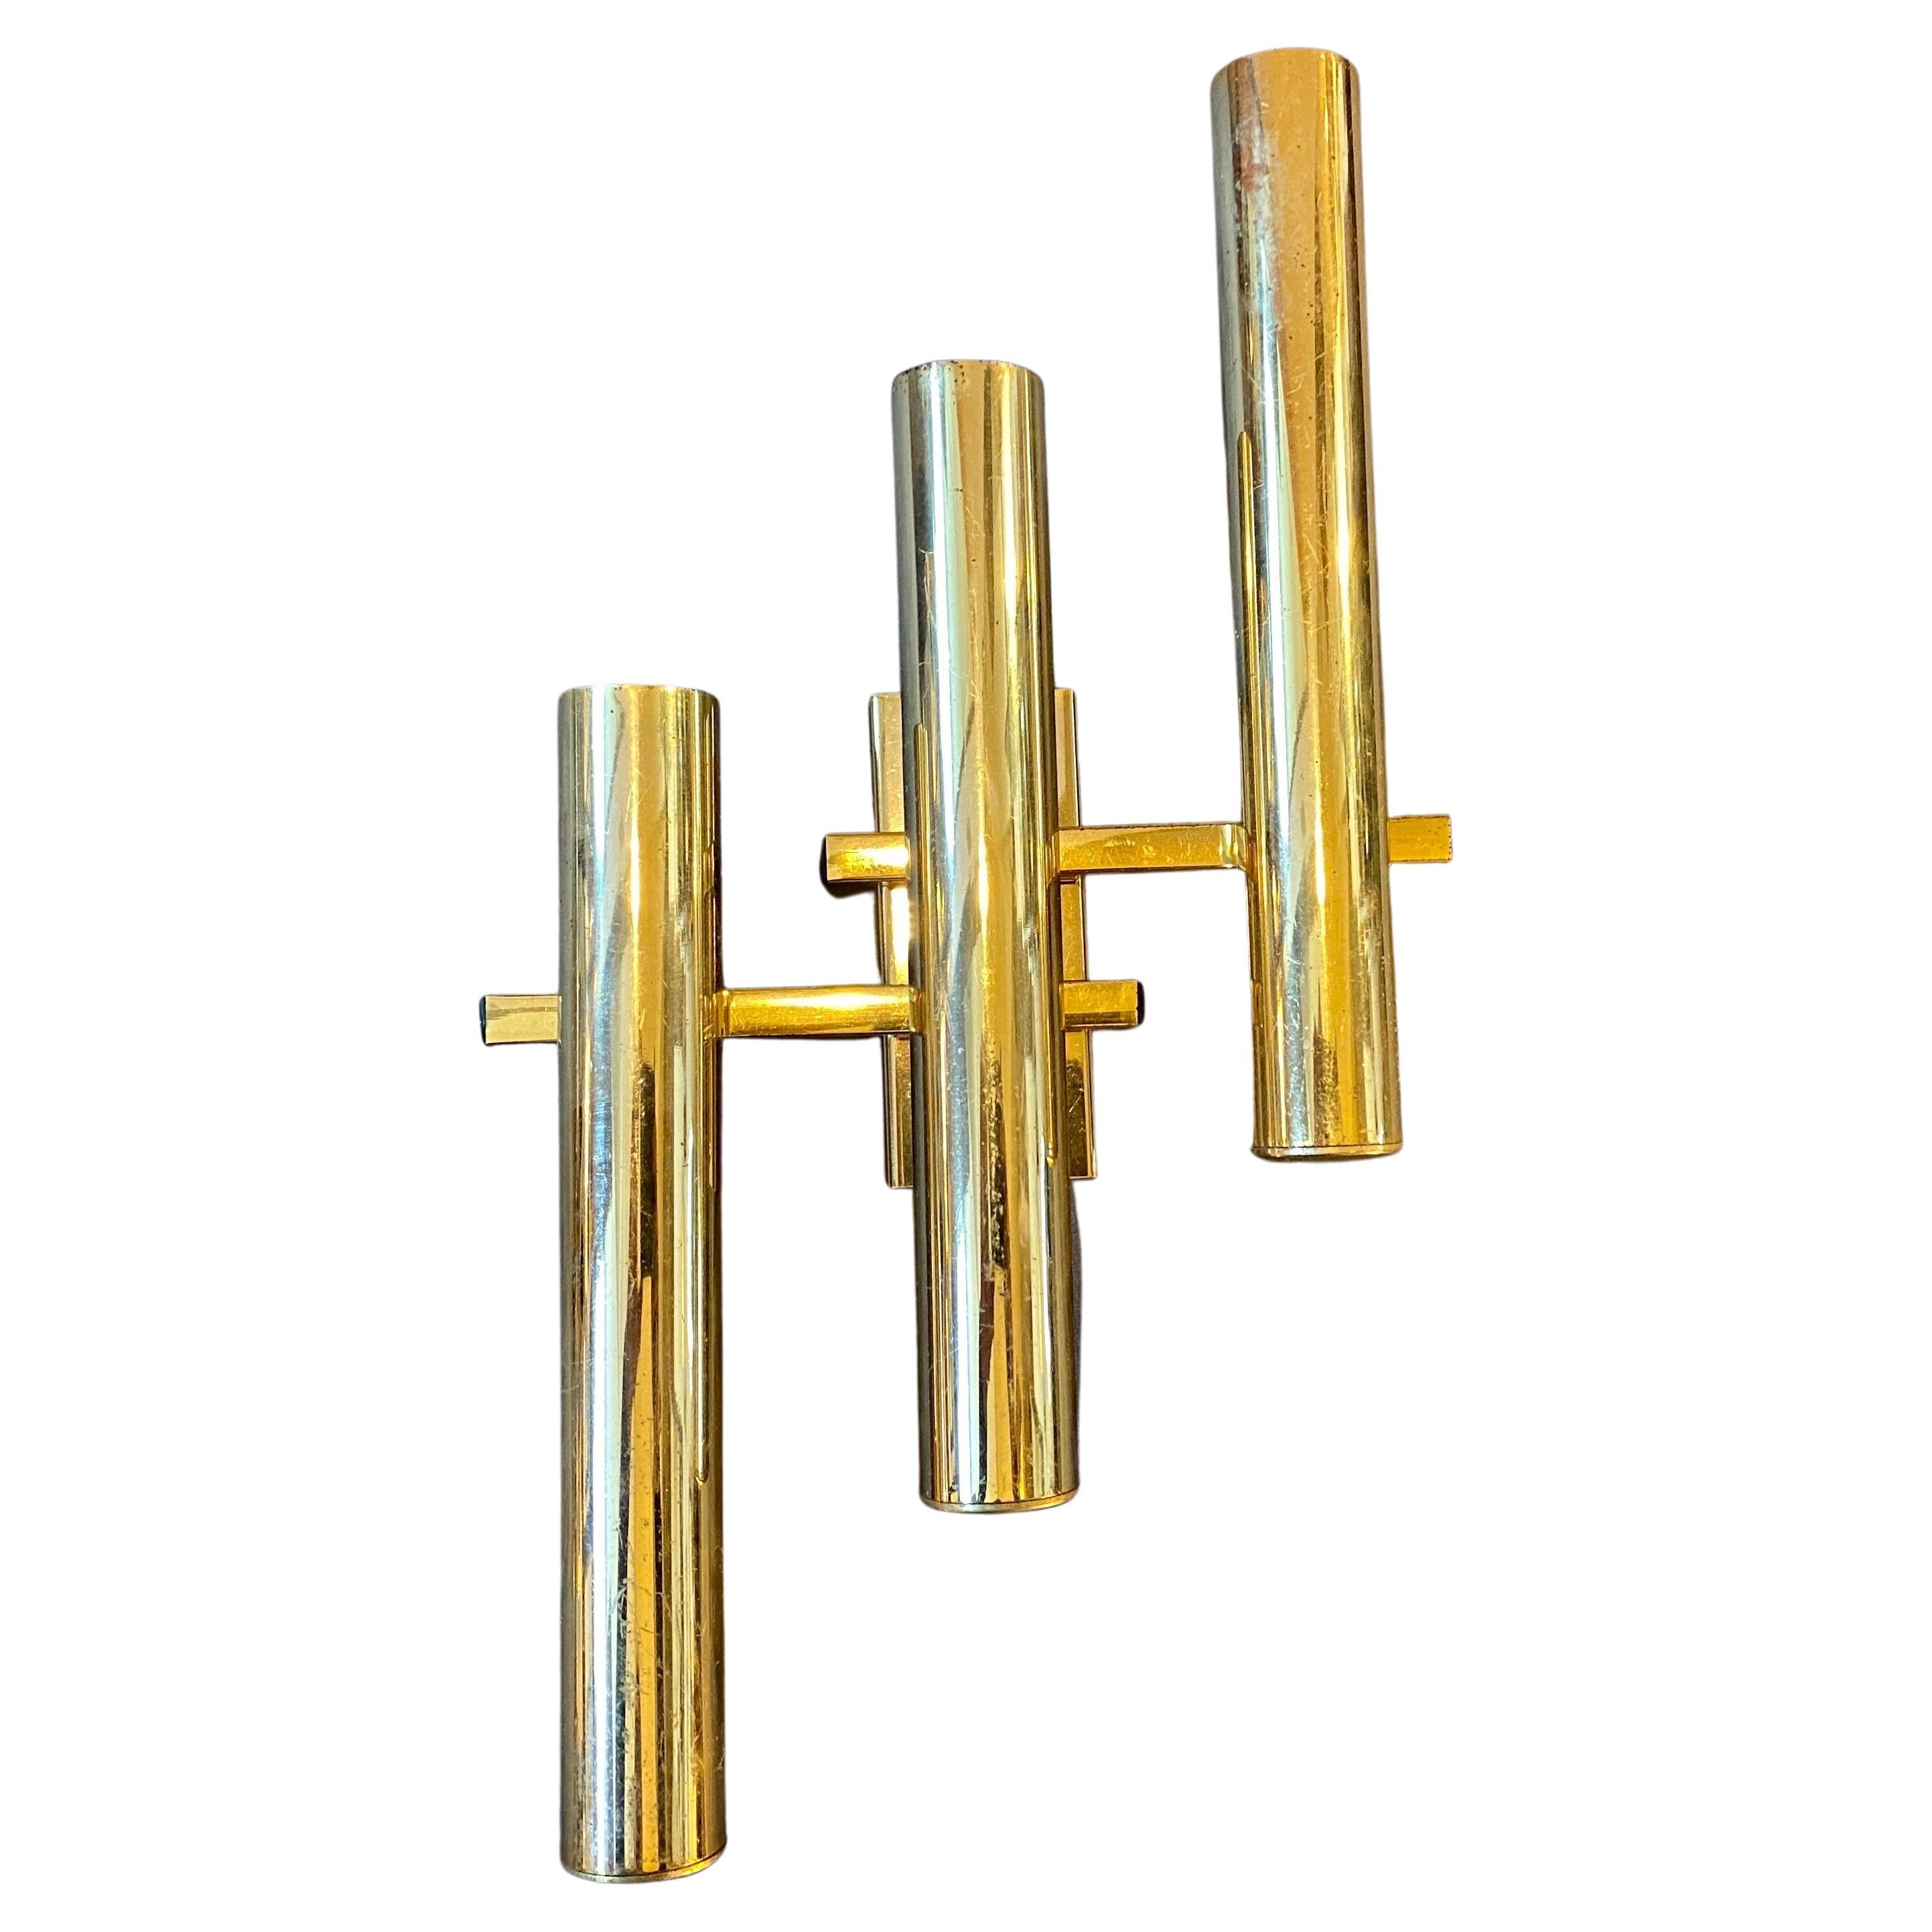 Four iconic brass three lights wall sconces designed by Gaetano Sciolari, manufactured in Italy in the Seventies, brass it's in original patina, they work both 110-240 volts and need three regular e14 bulbs for each sconce.